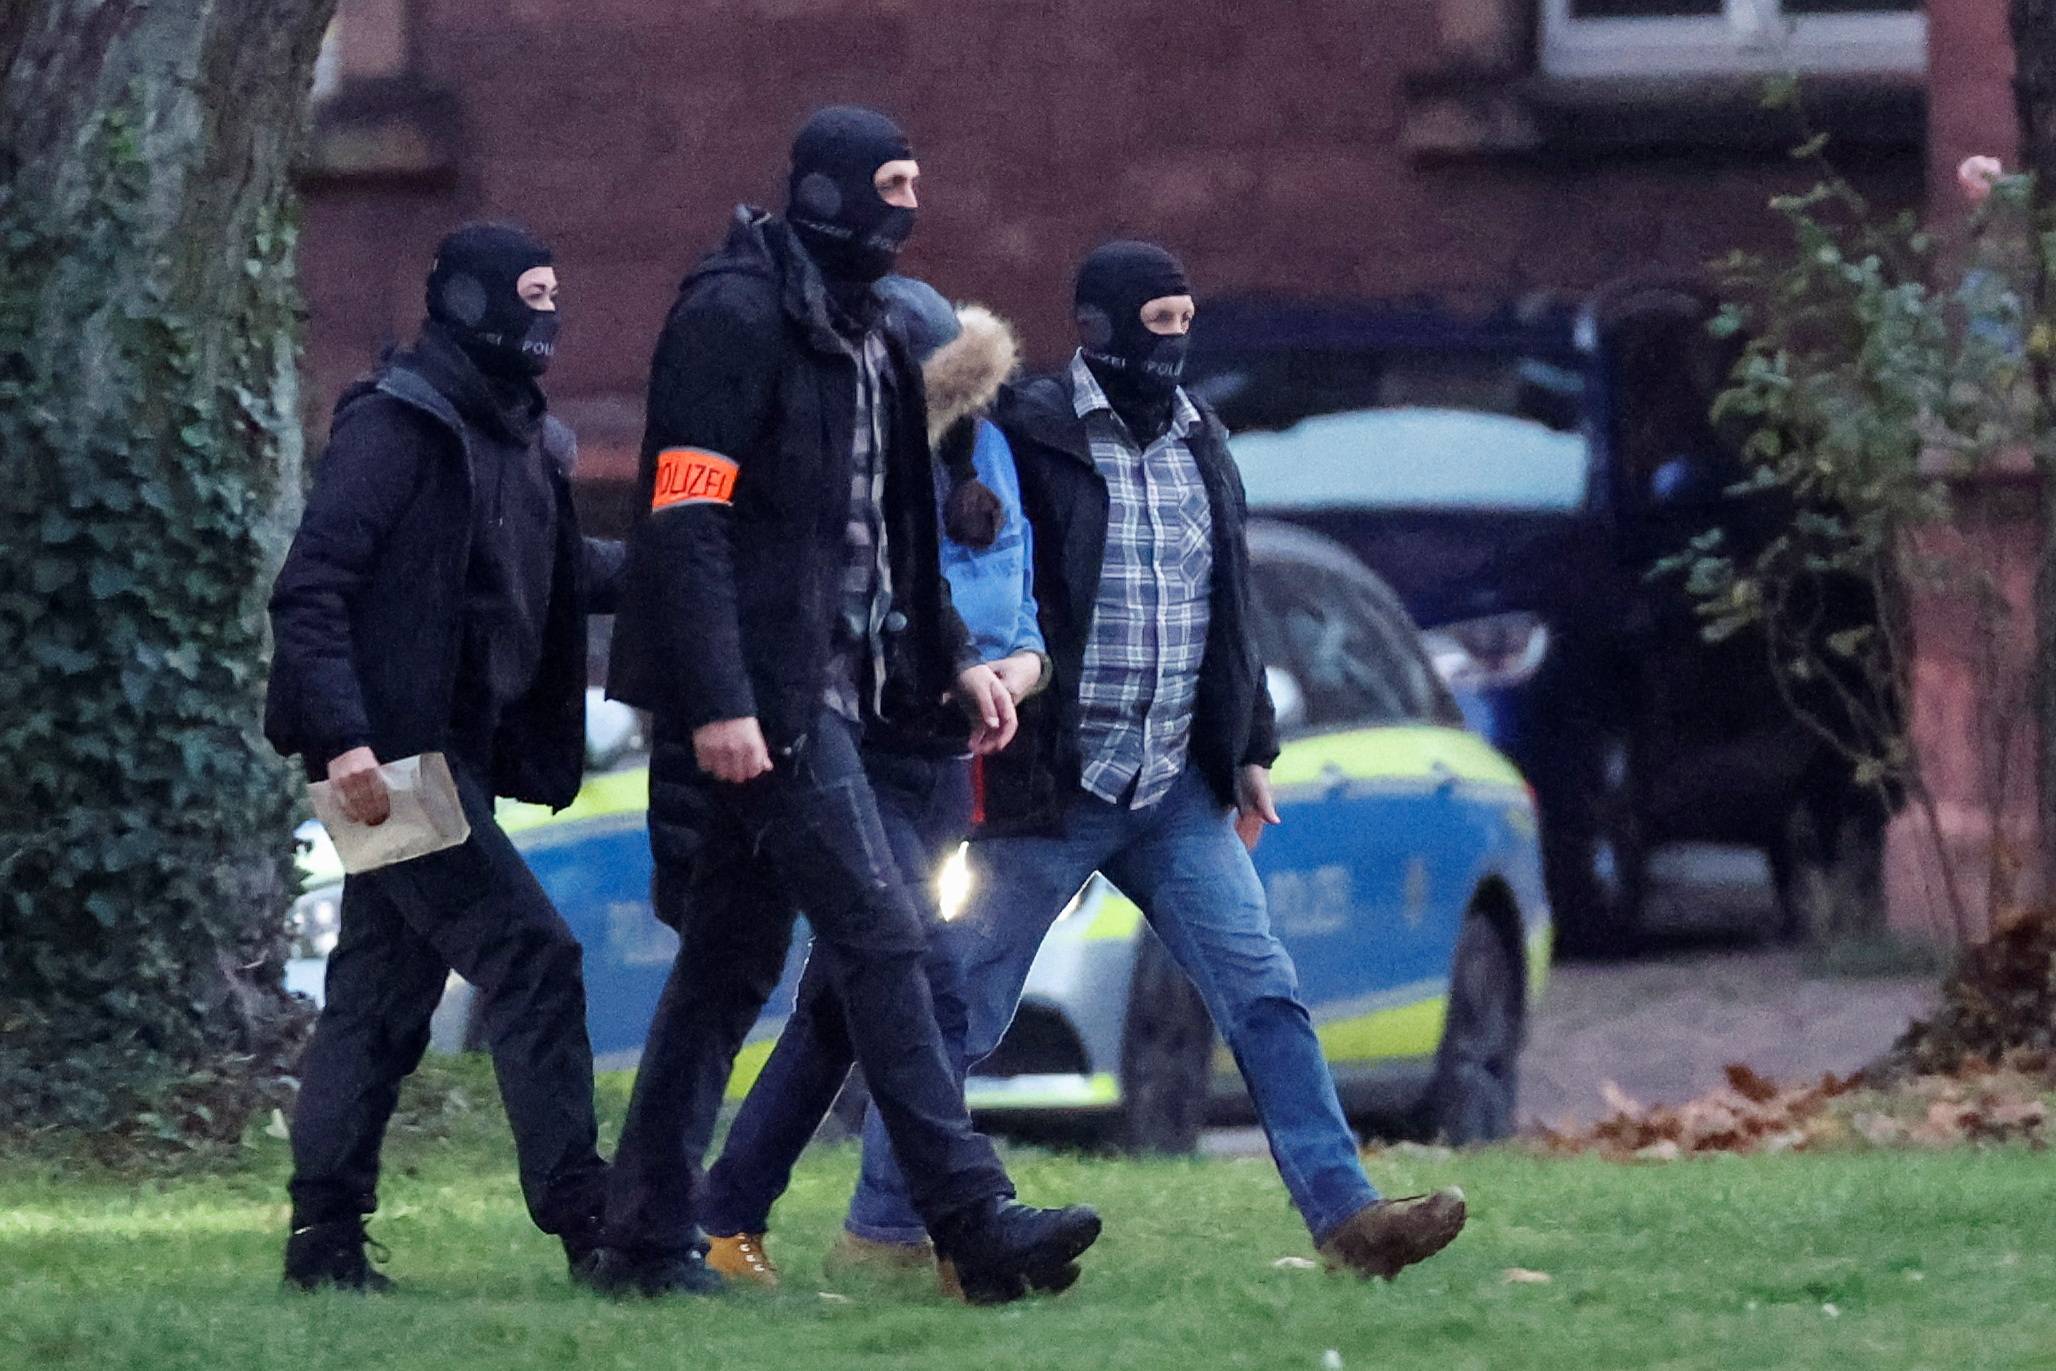 Police escort a person after a suspected member of the far-right group. /Heiko Becker/Reuters